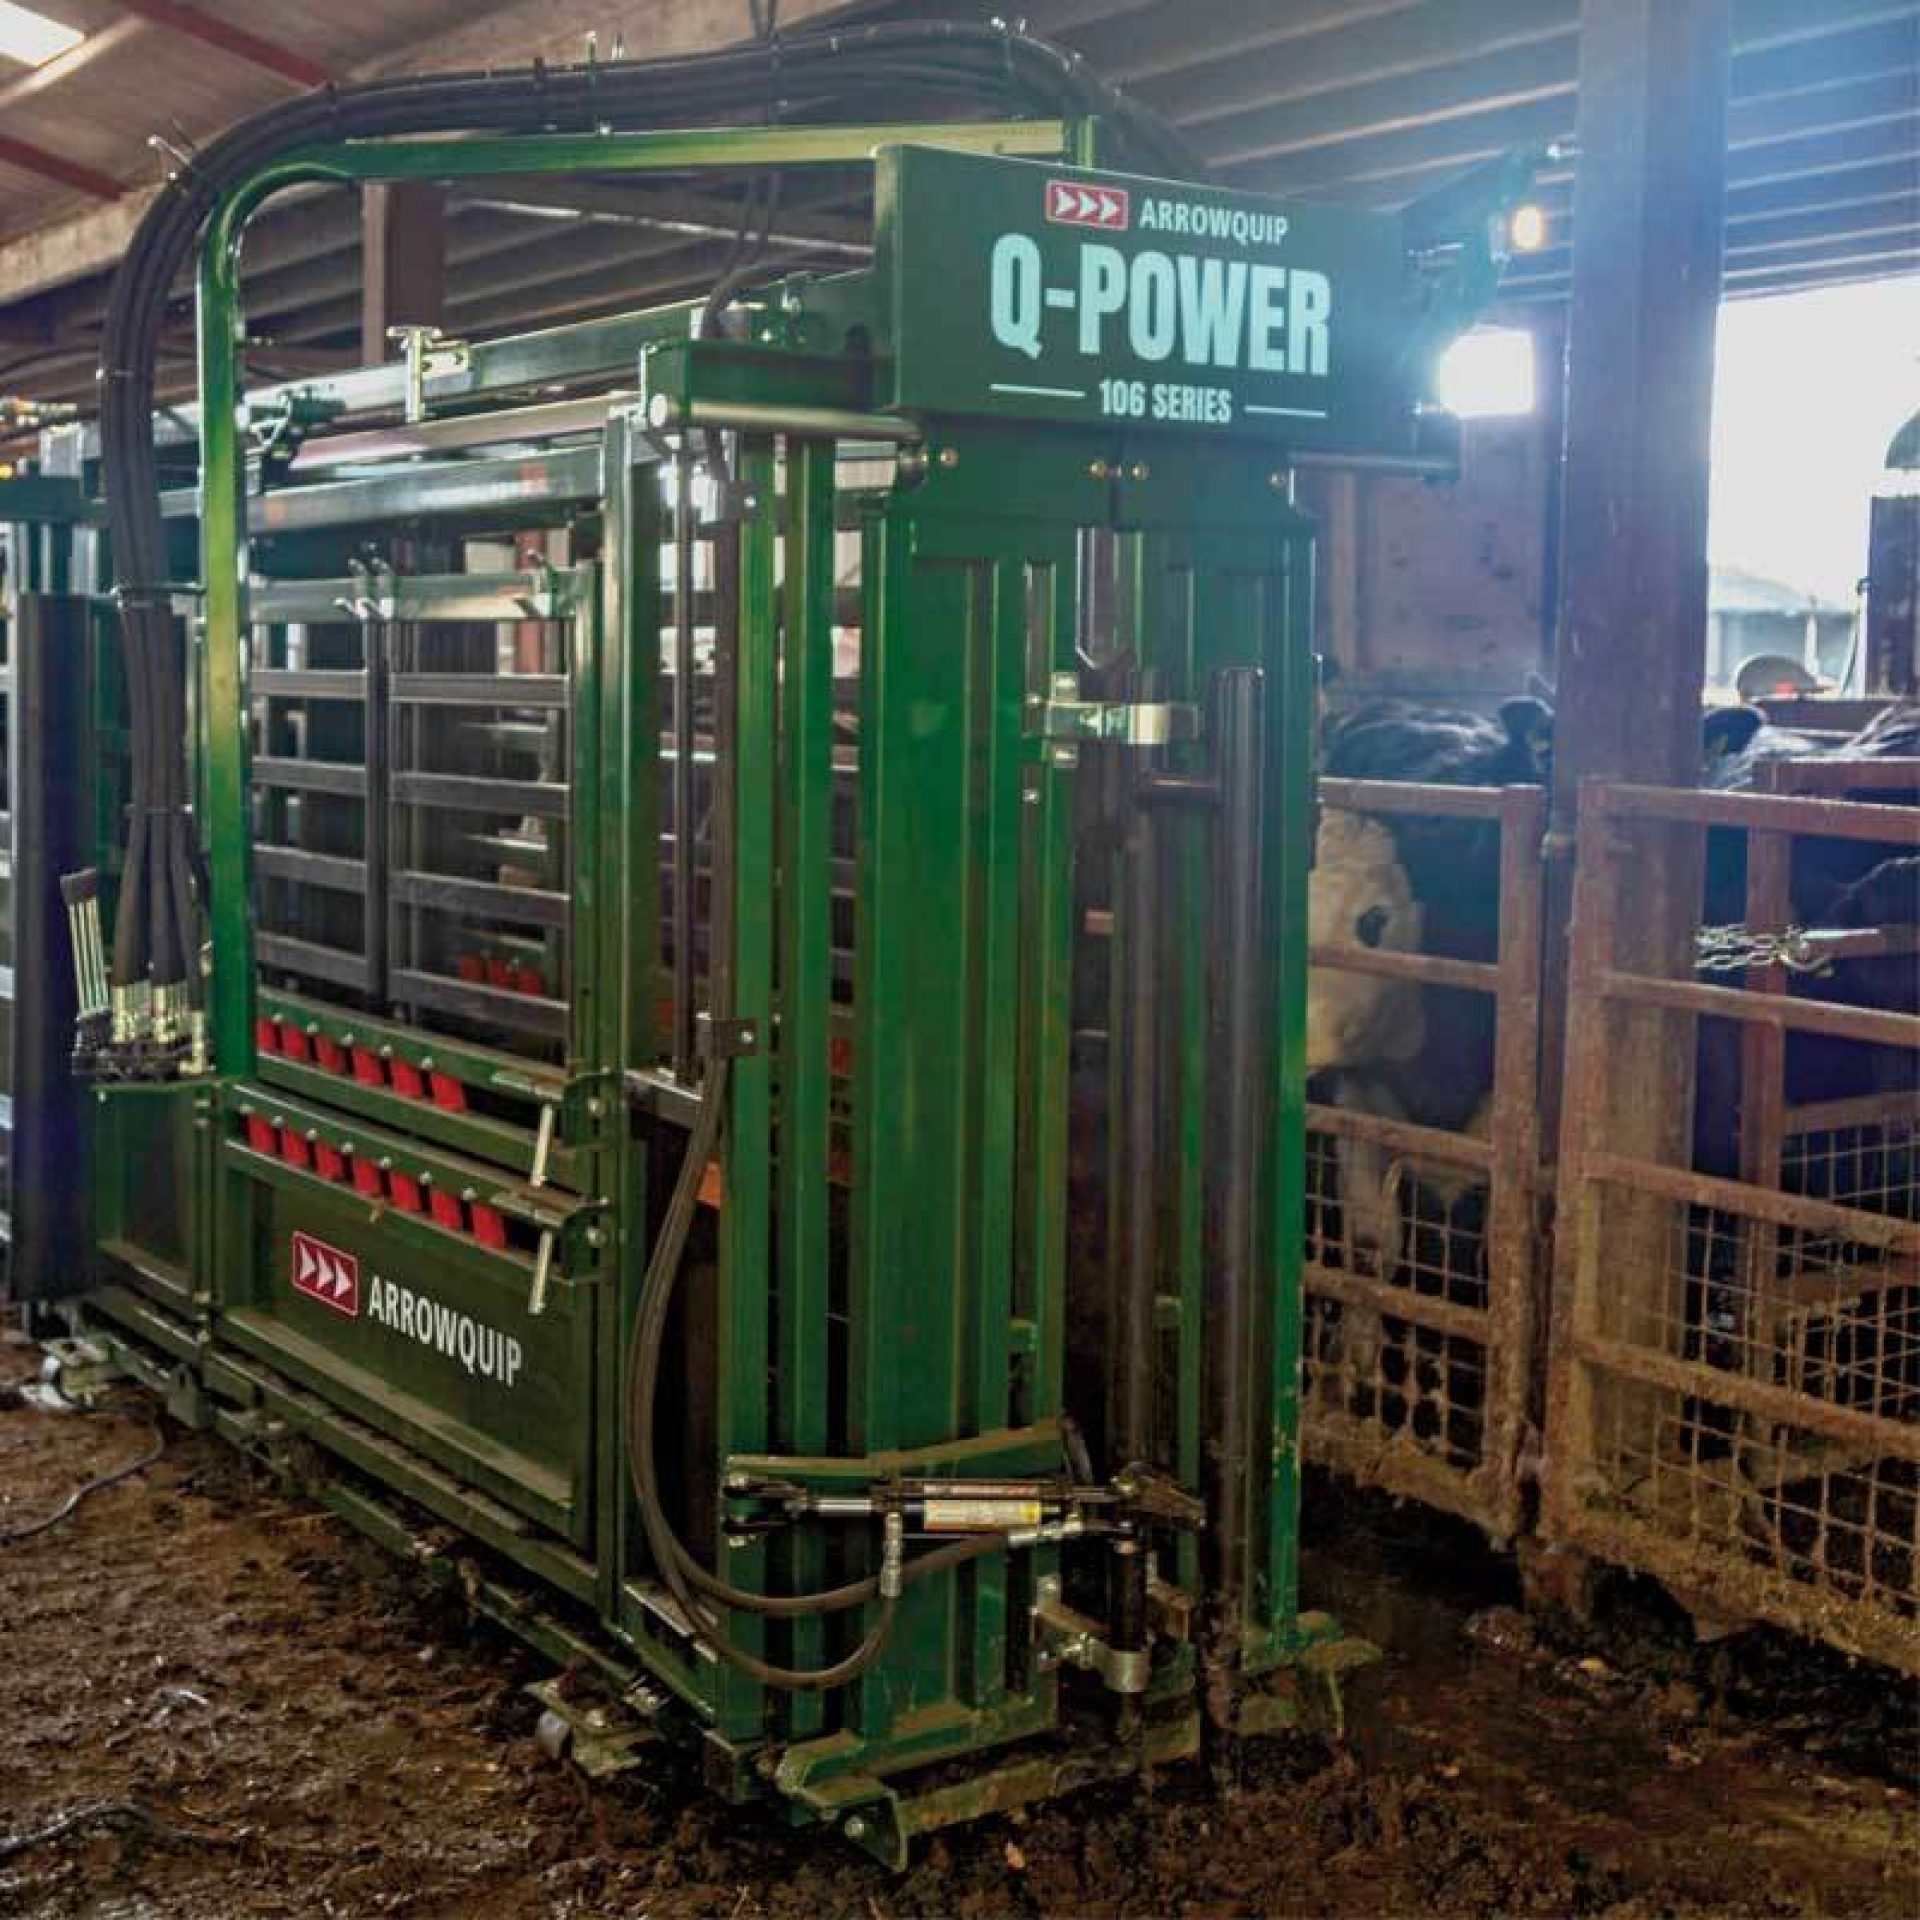 Hydraulic cattle chute in barn for processing livestock